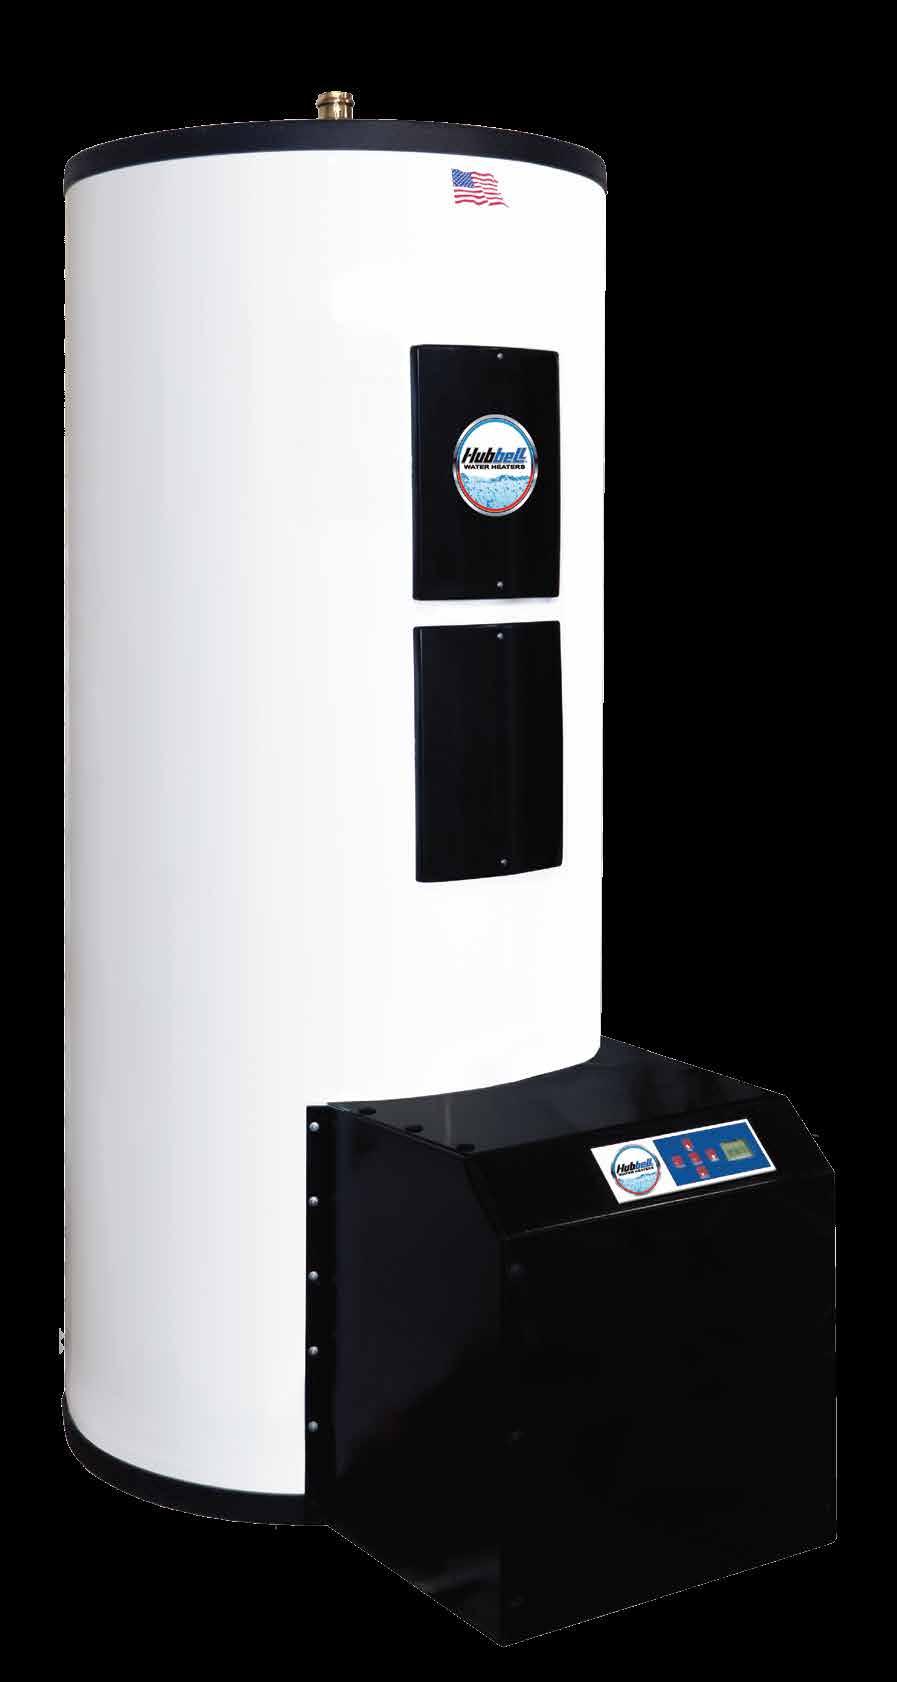 storage water heater features a fully integrated burner and field removable 316L SS